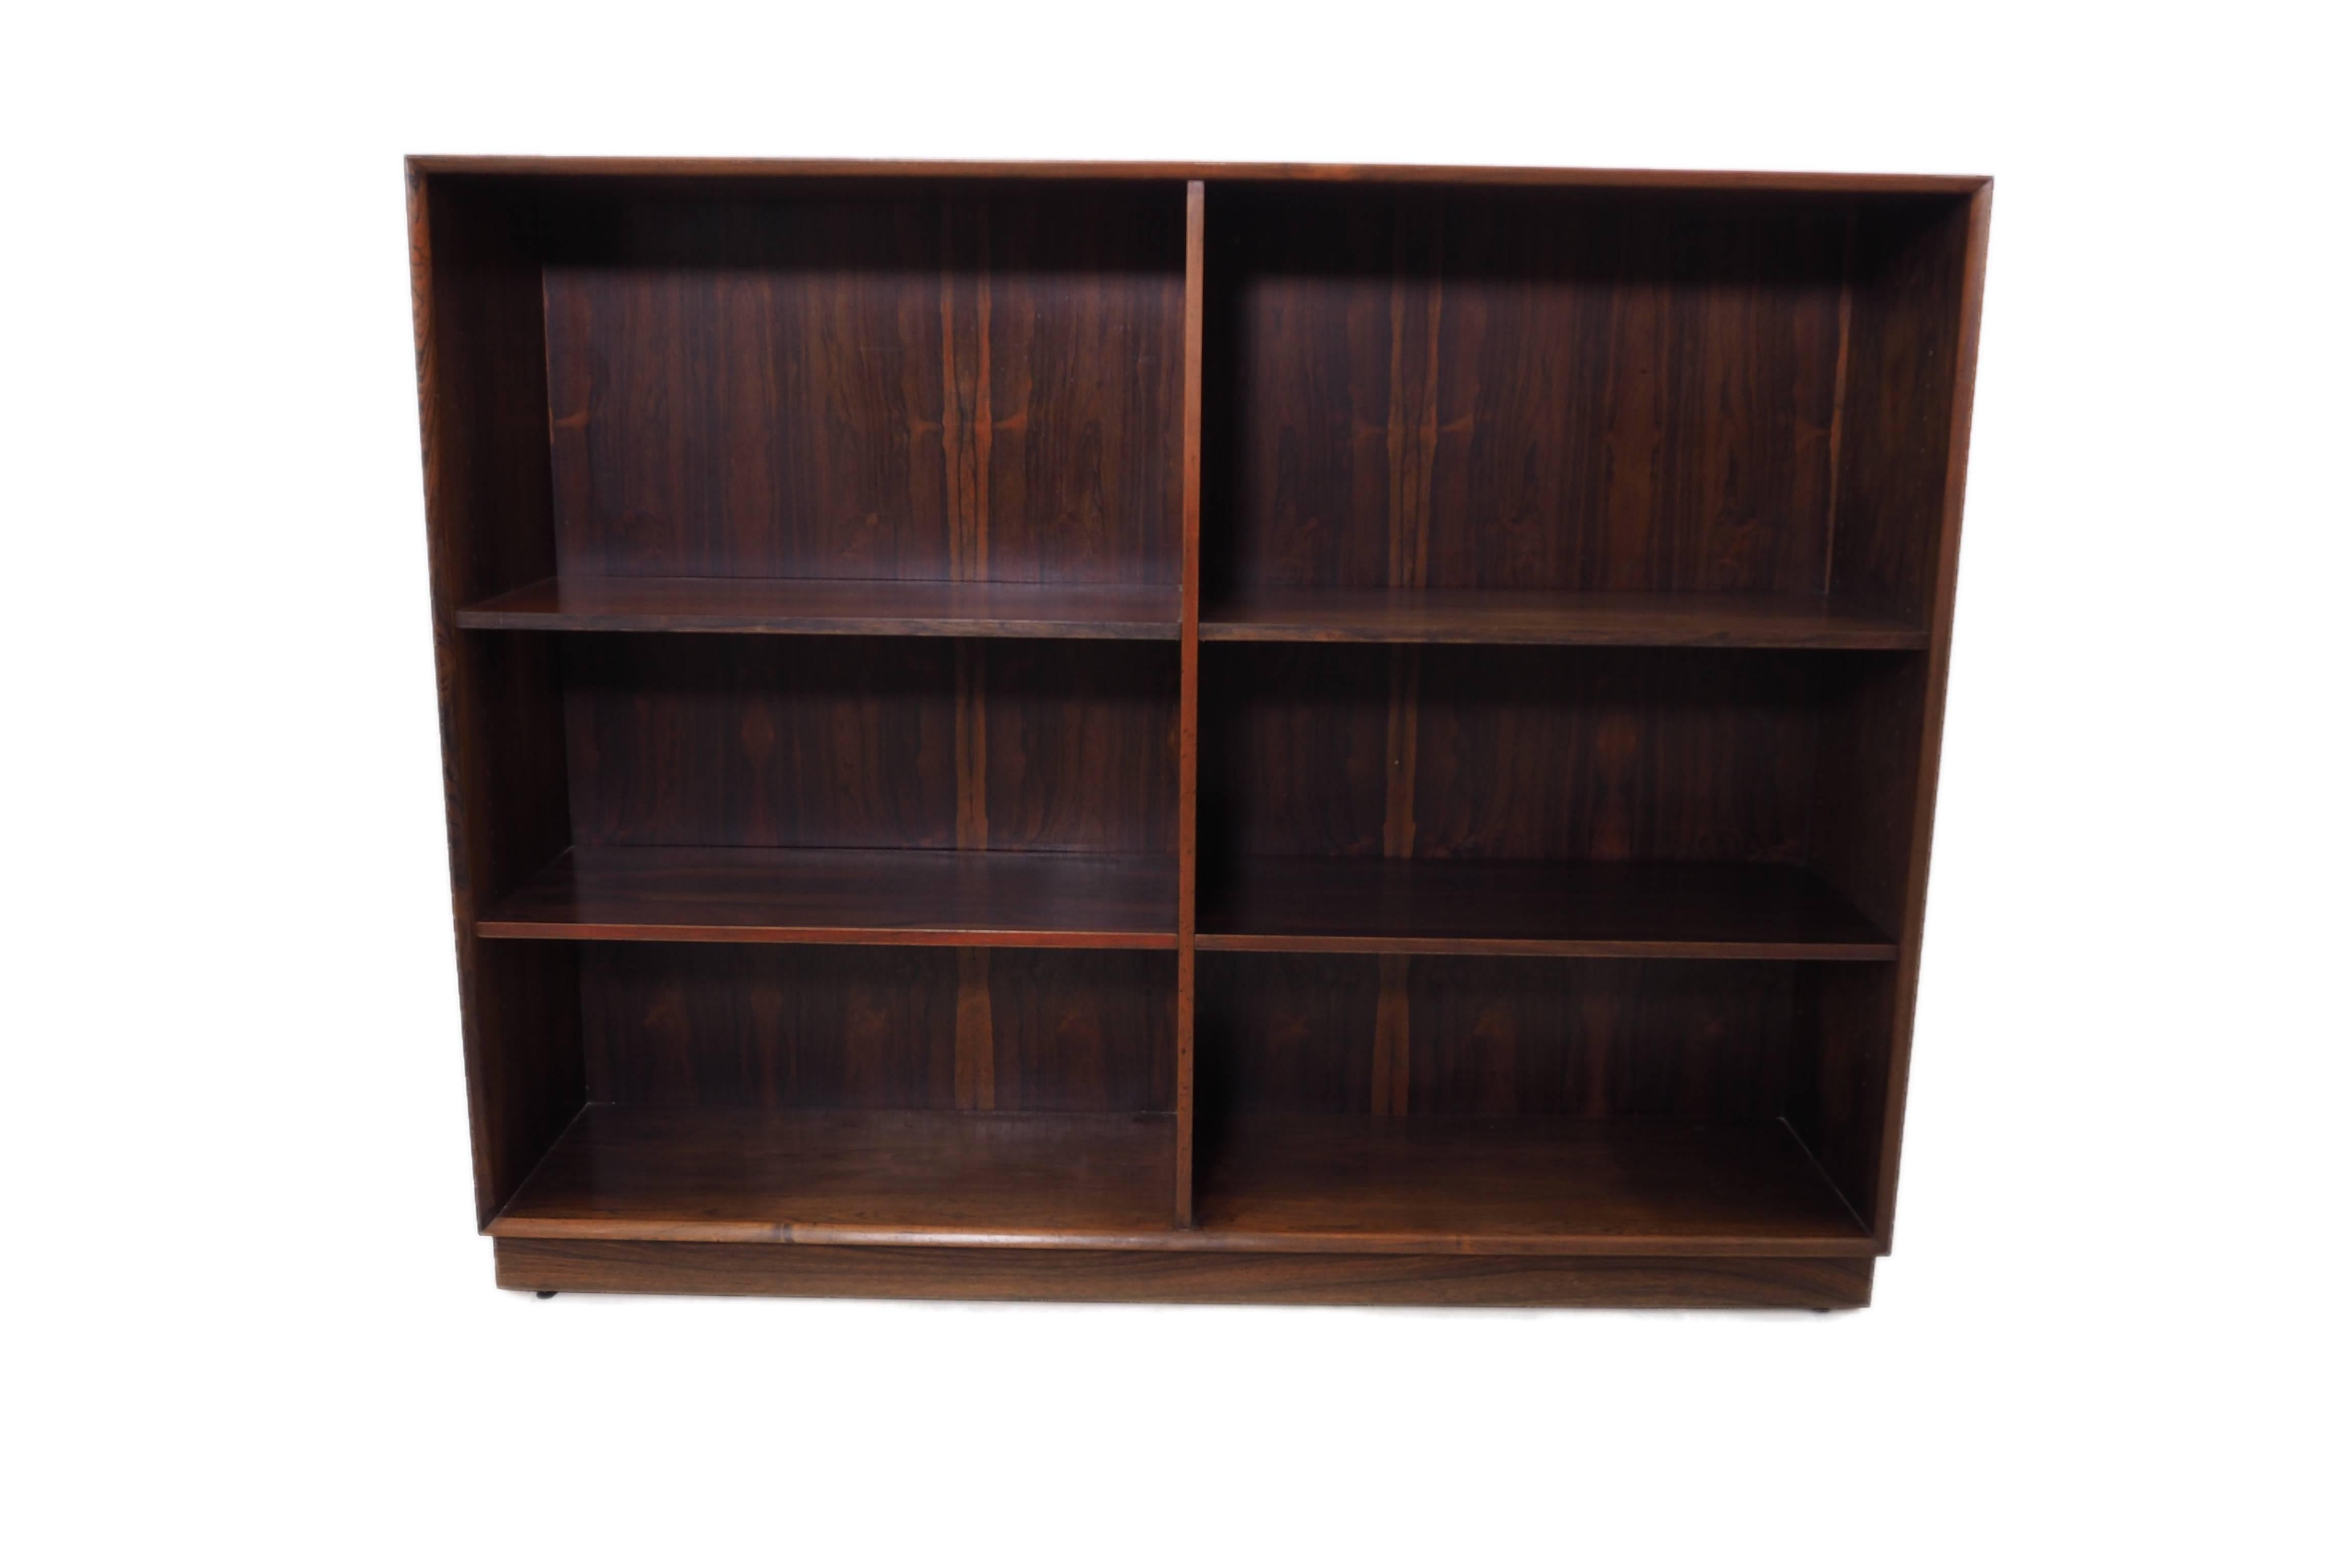 Bookcase by Arne Vodder for Sibast
Danish design bookcase in rosewood.
Four shelves, you are able to change the heights of the shelves.